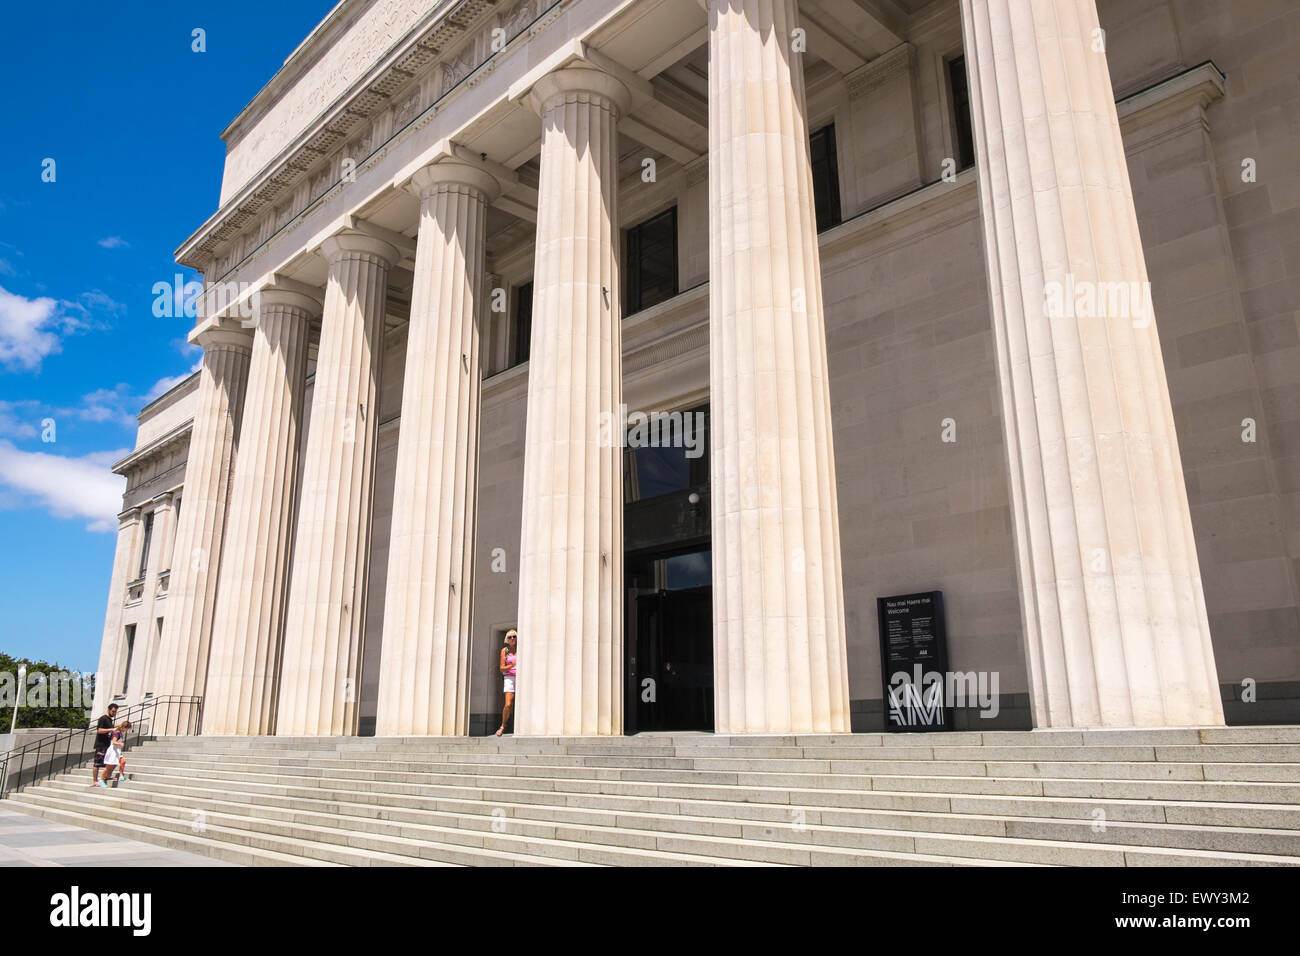 The Auckland Museum building in The auckland domain, Parnell, new Zealand. Neoclassical architecture Stock Photo